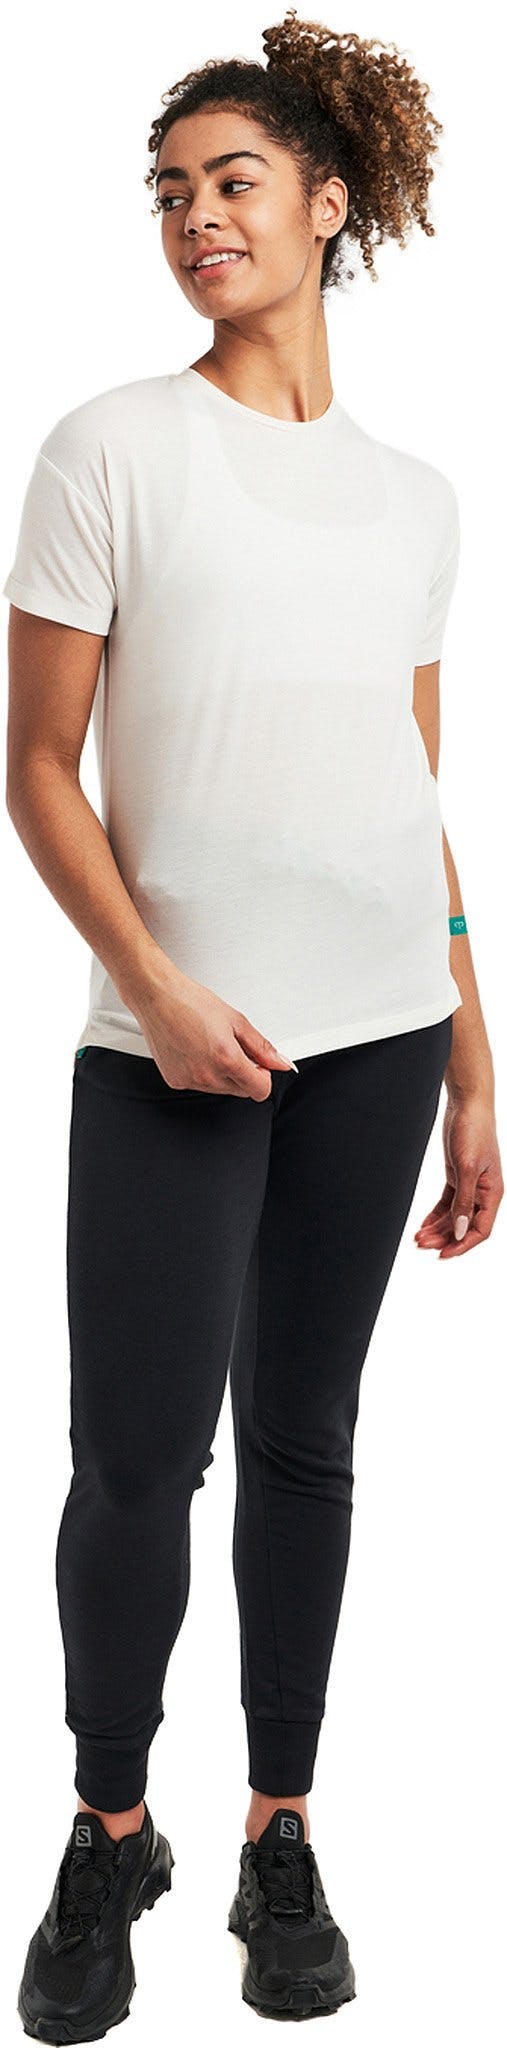 Product image for Mellow Tee - Women's